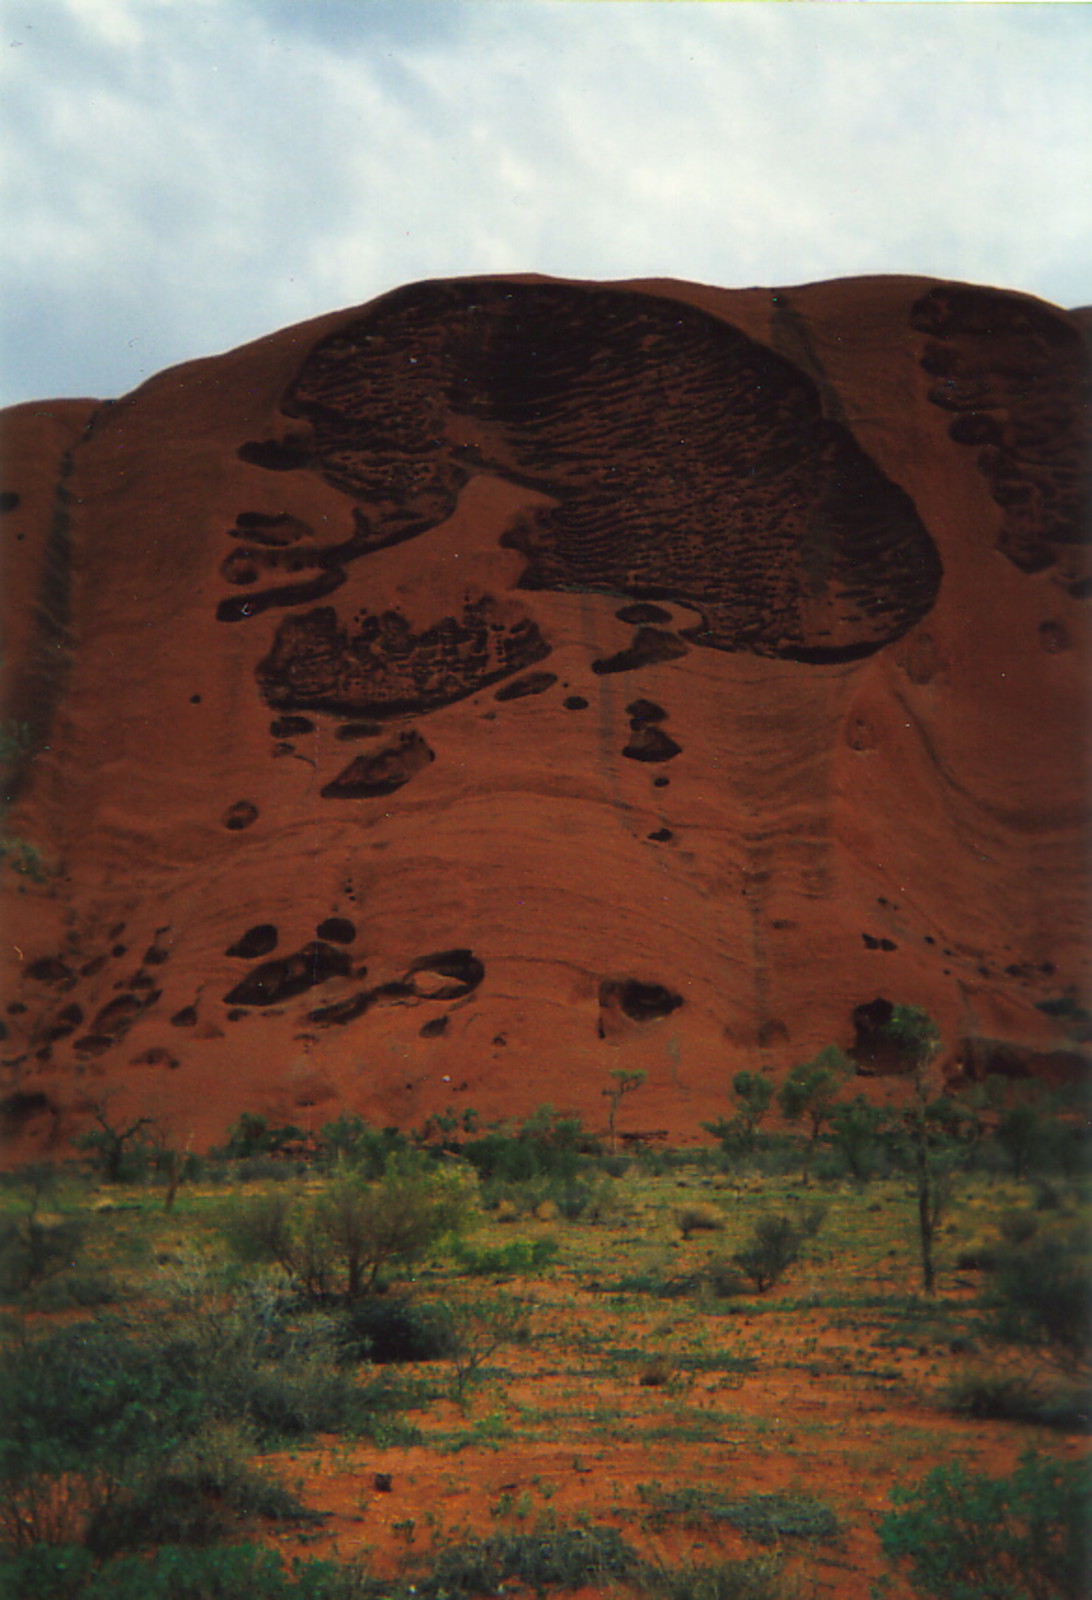 Textures on the side of Uluru